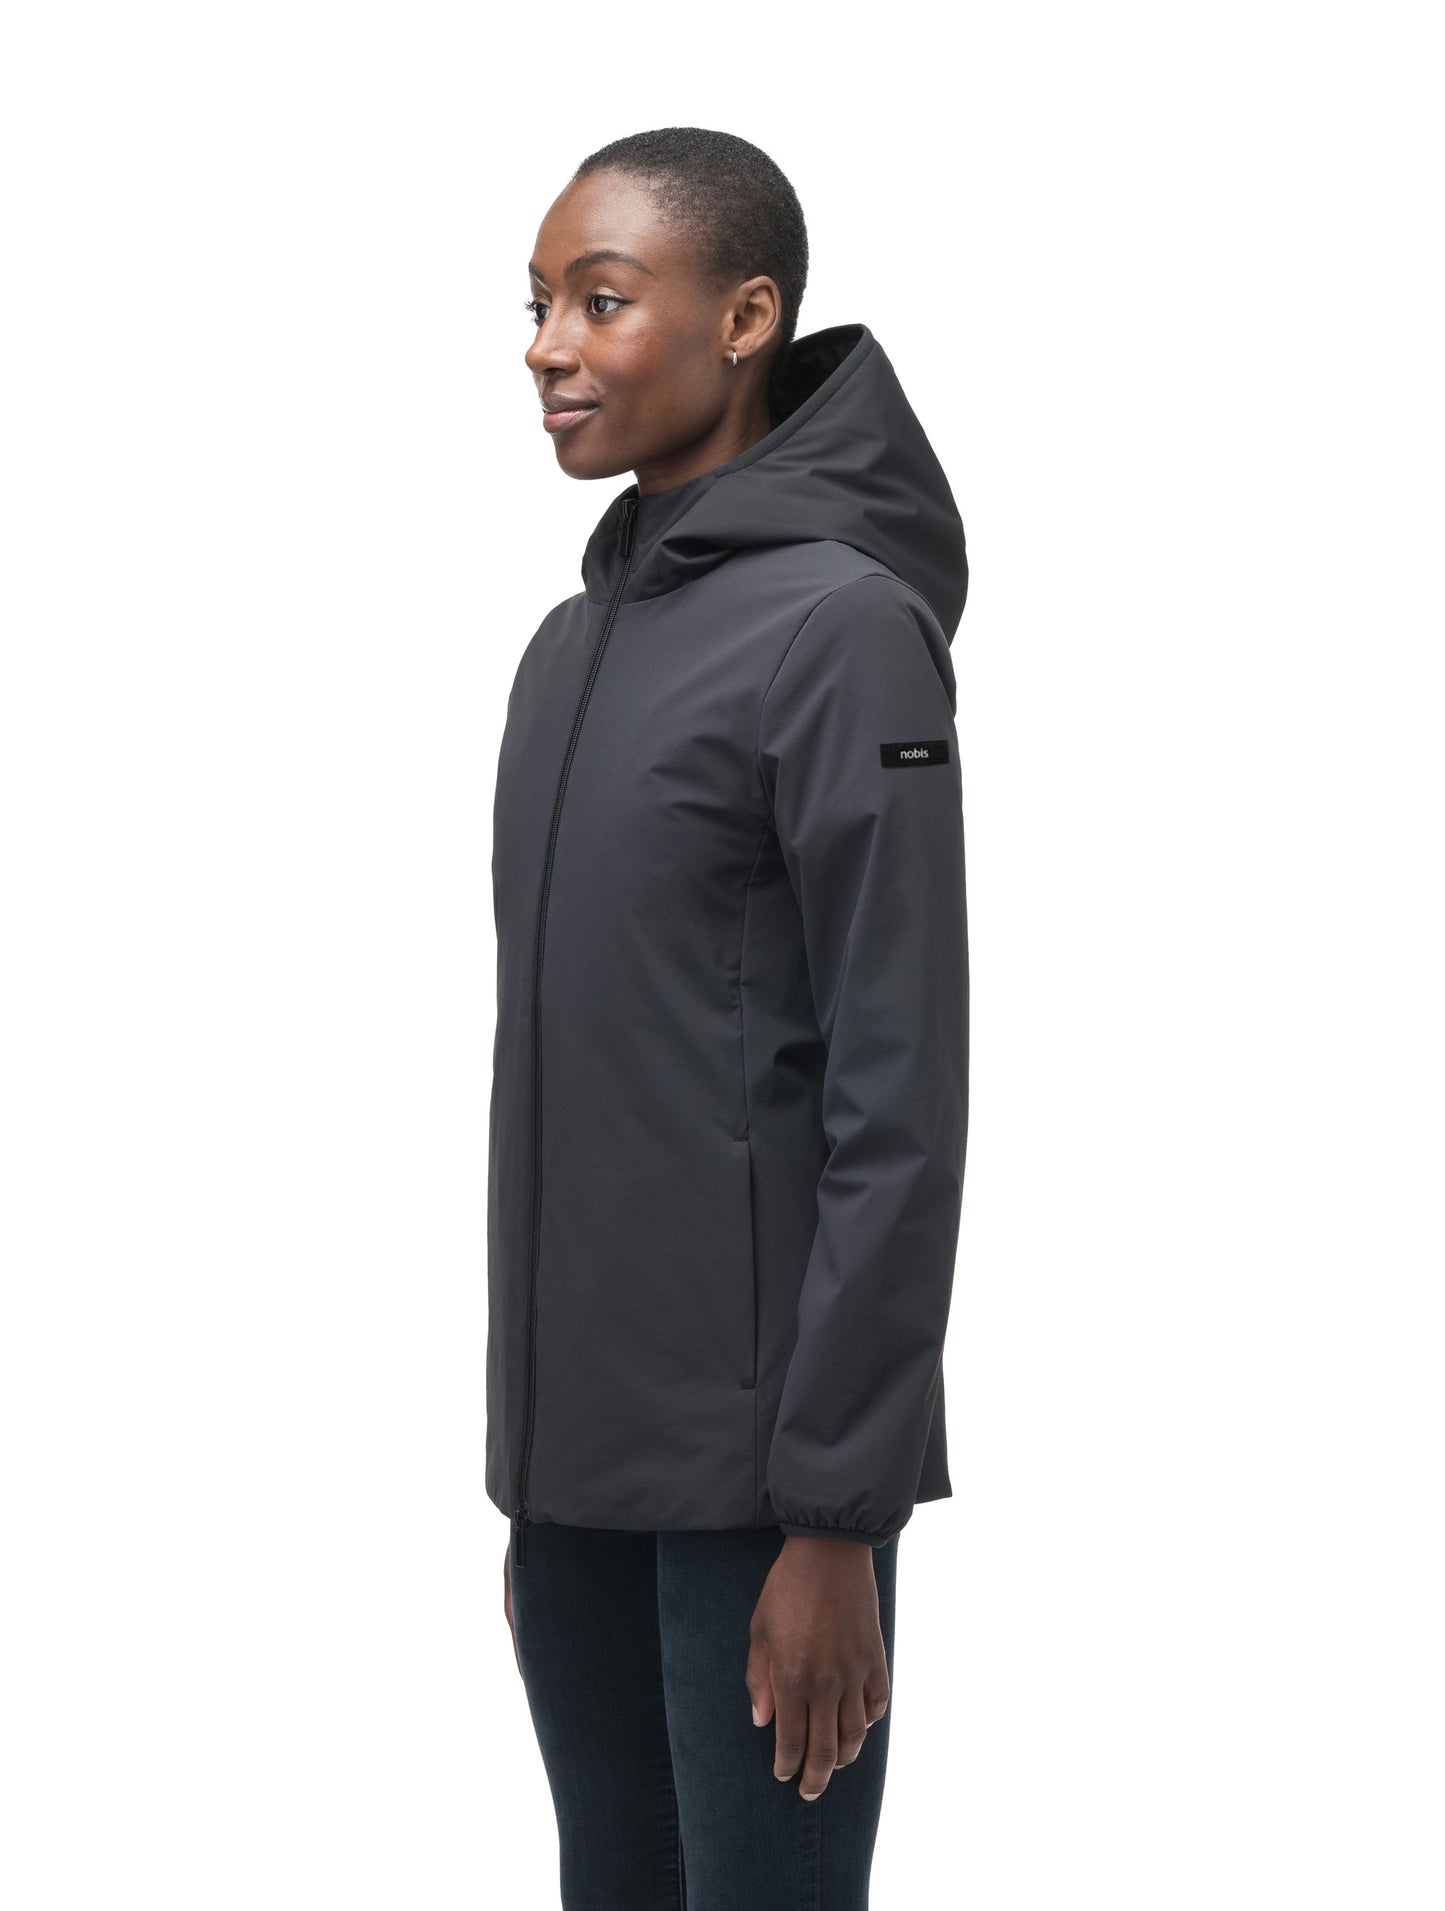 Ladies hip length mid layer jacket with non-removable hood and two-way zipper in Black